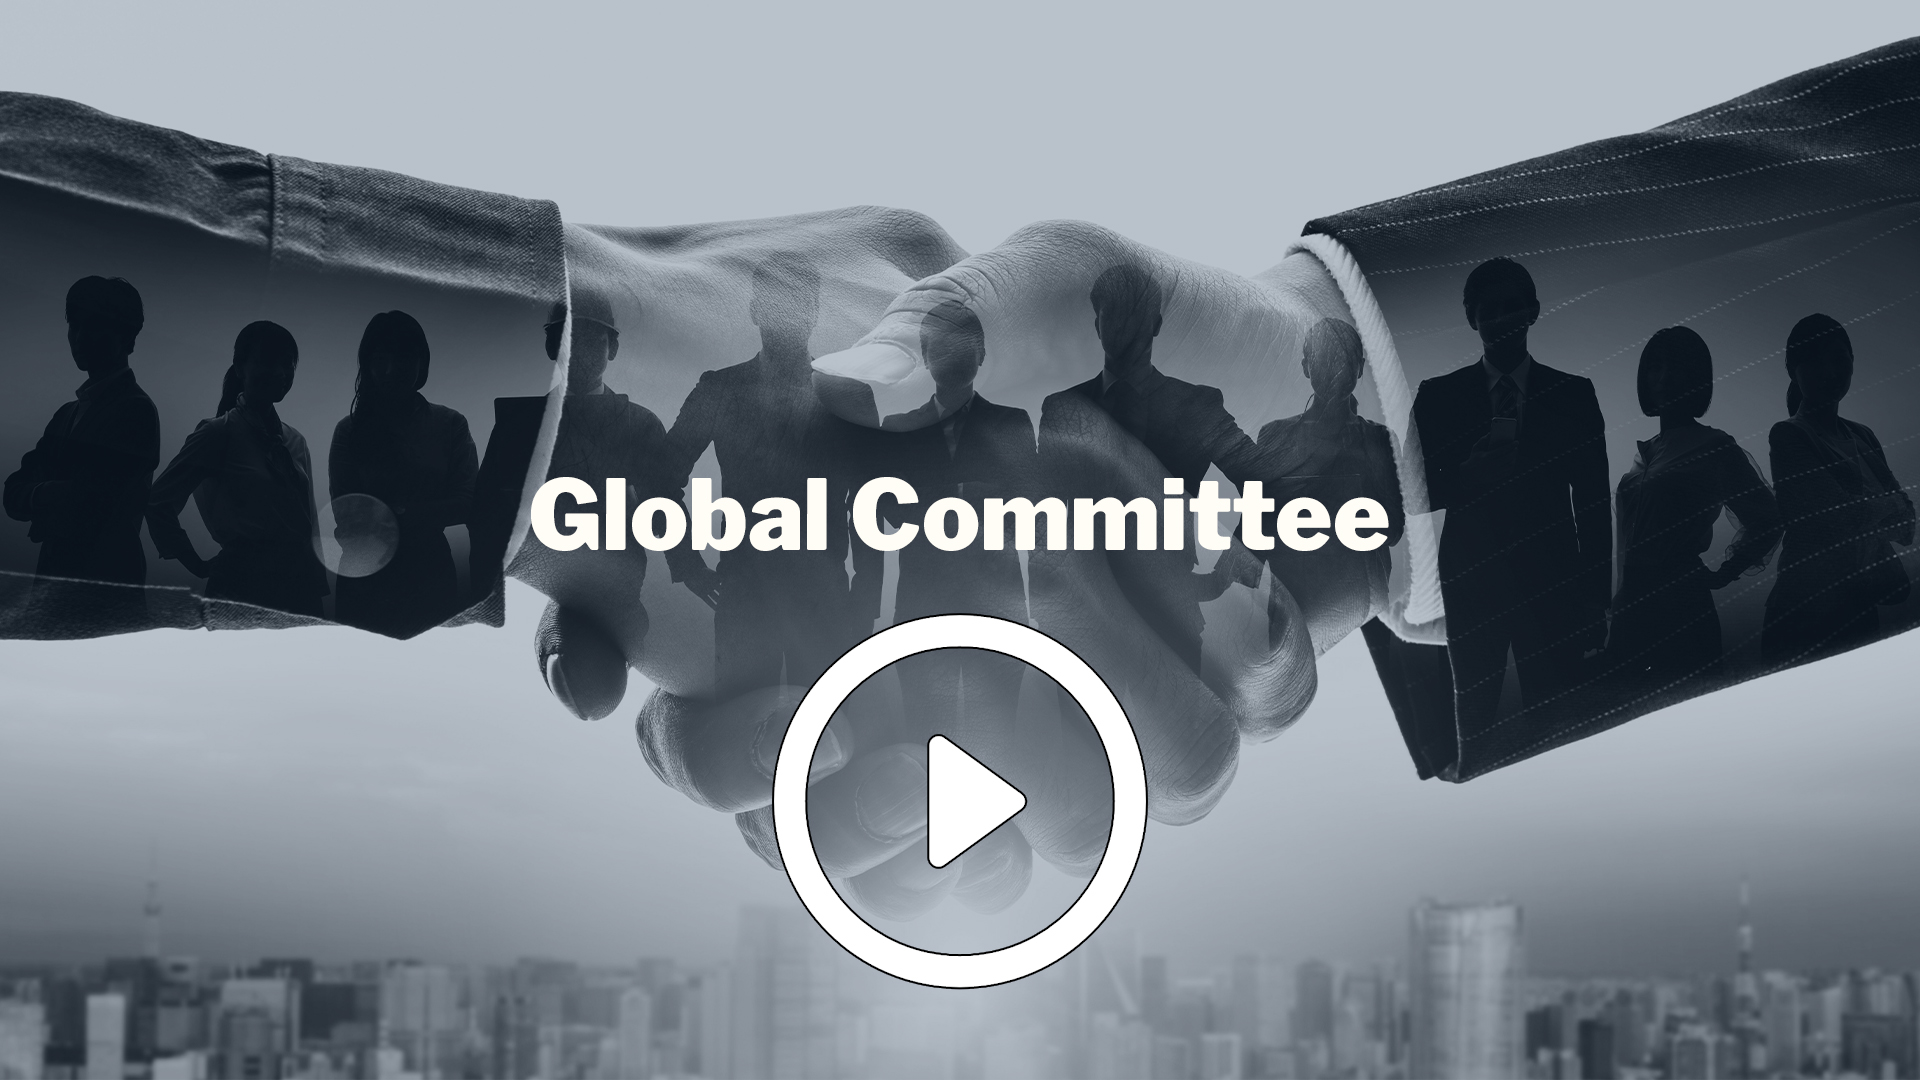 Global Committee Overview Video